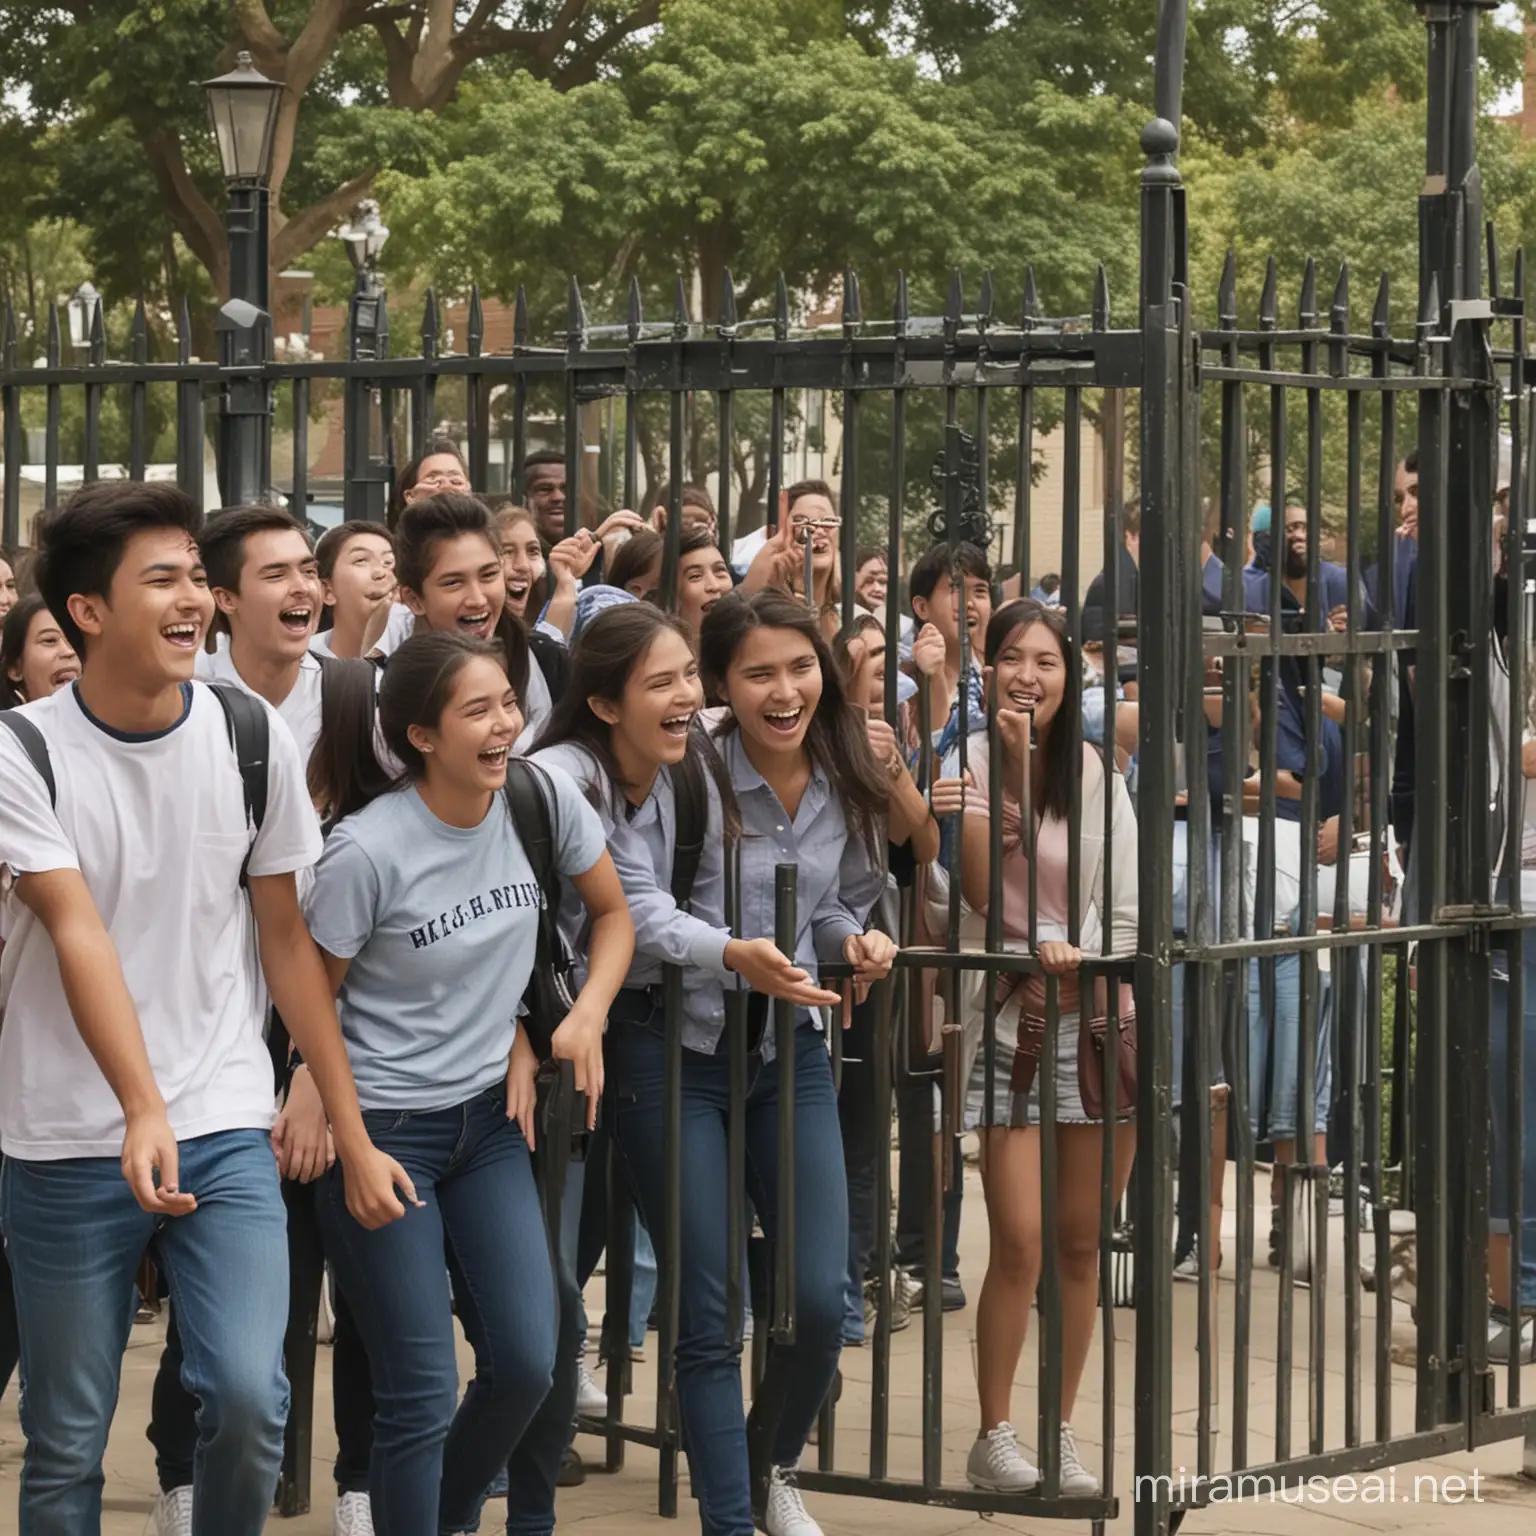 Cheerful College Students Entering Campus Gates